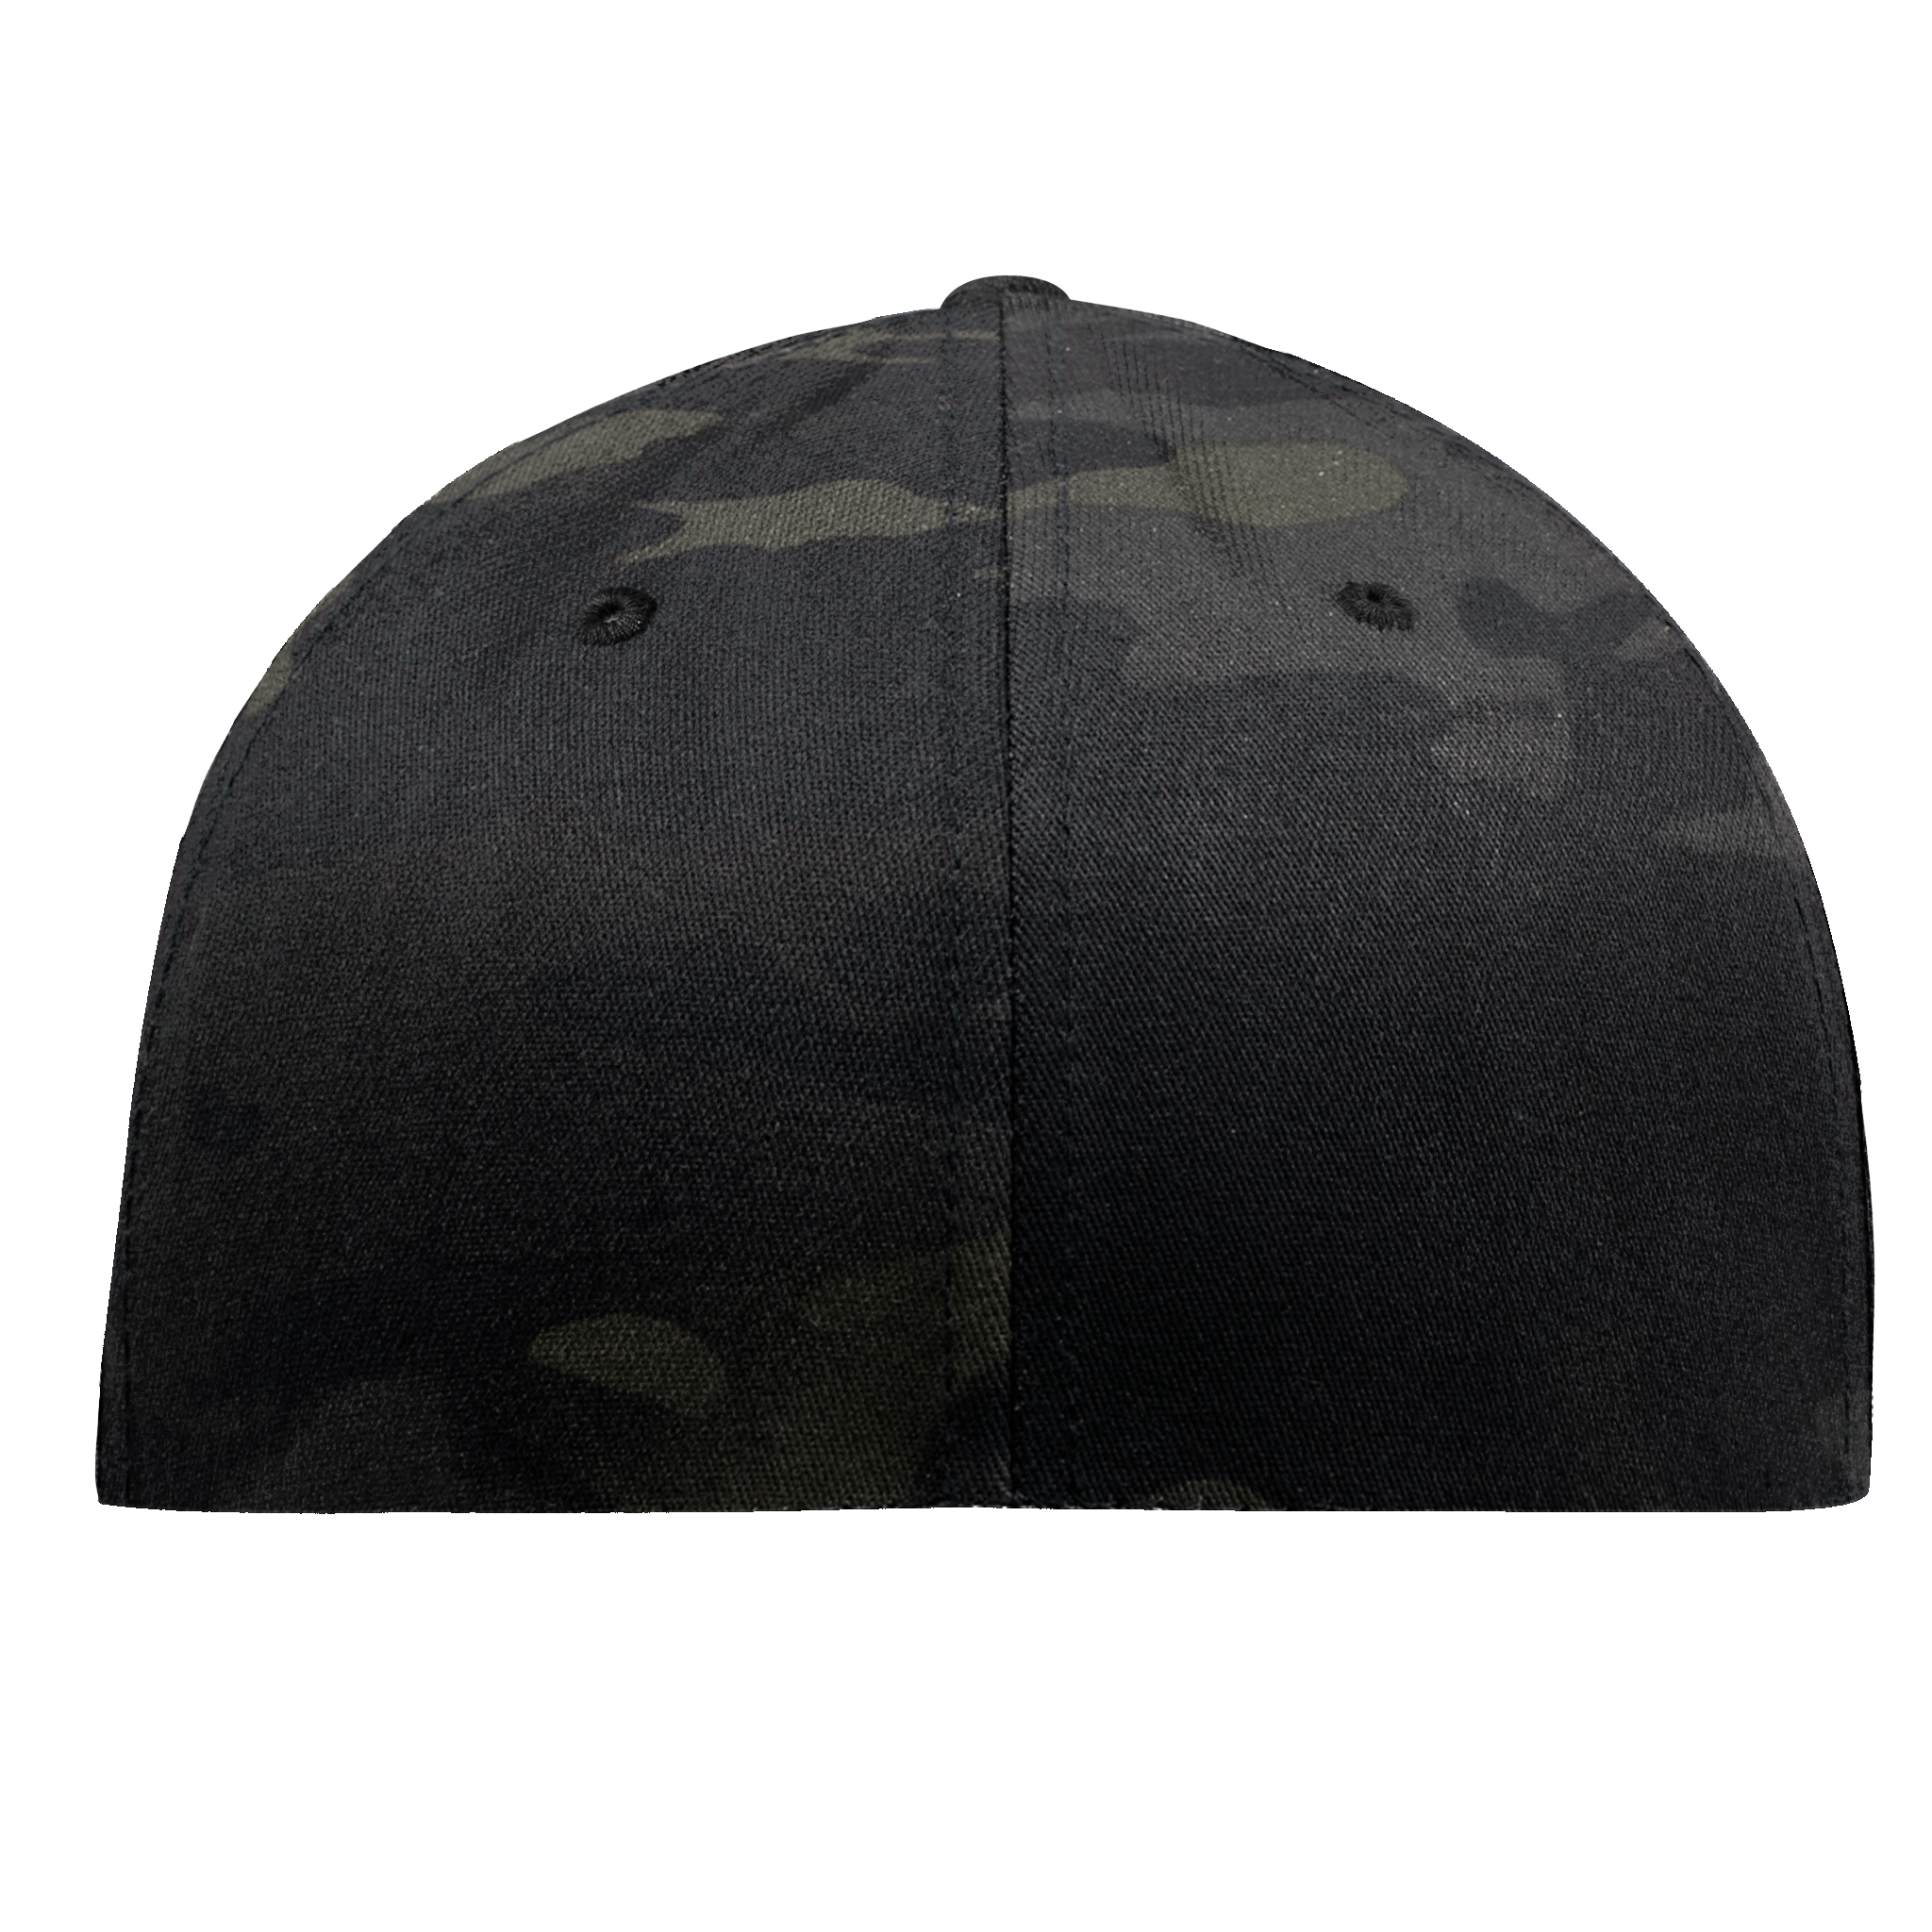 Old Glory Flexfit Fitted Back Multicam